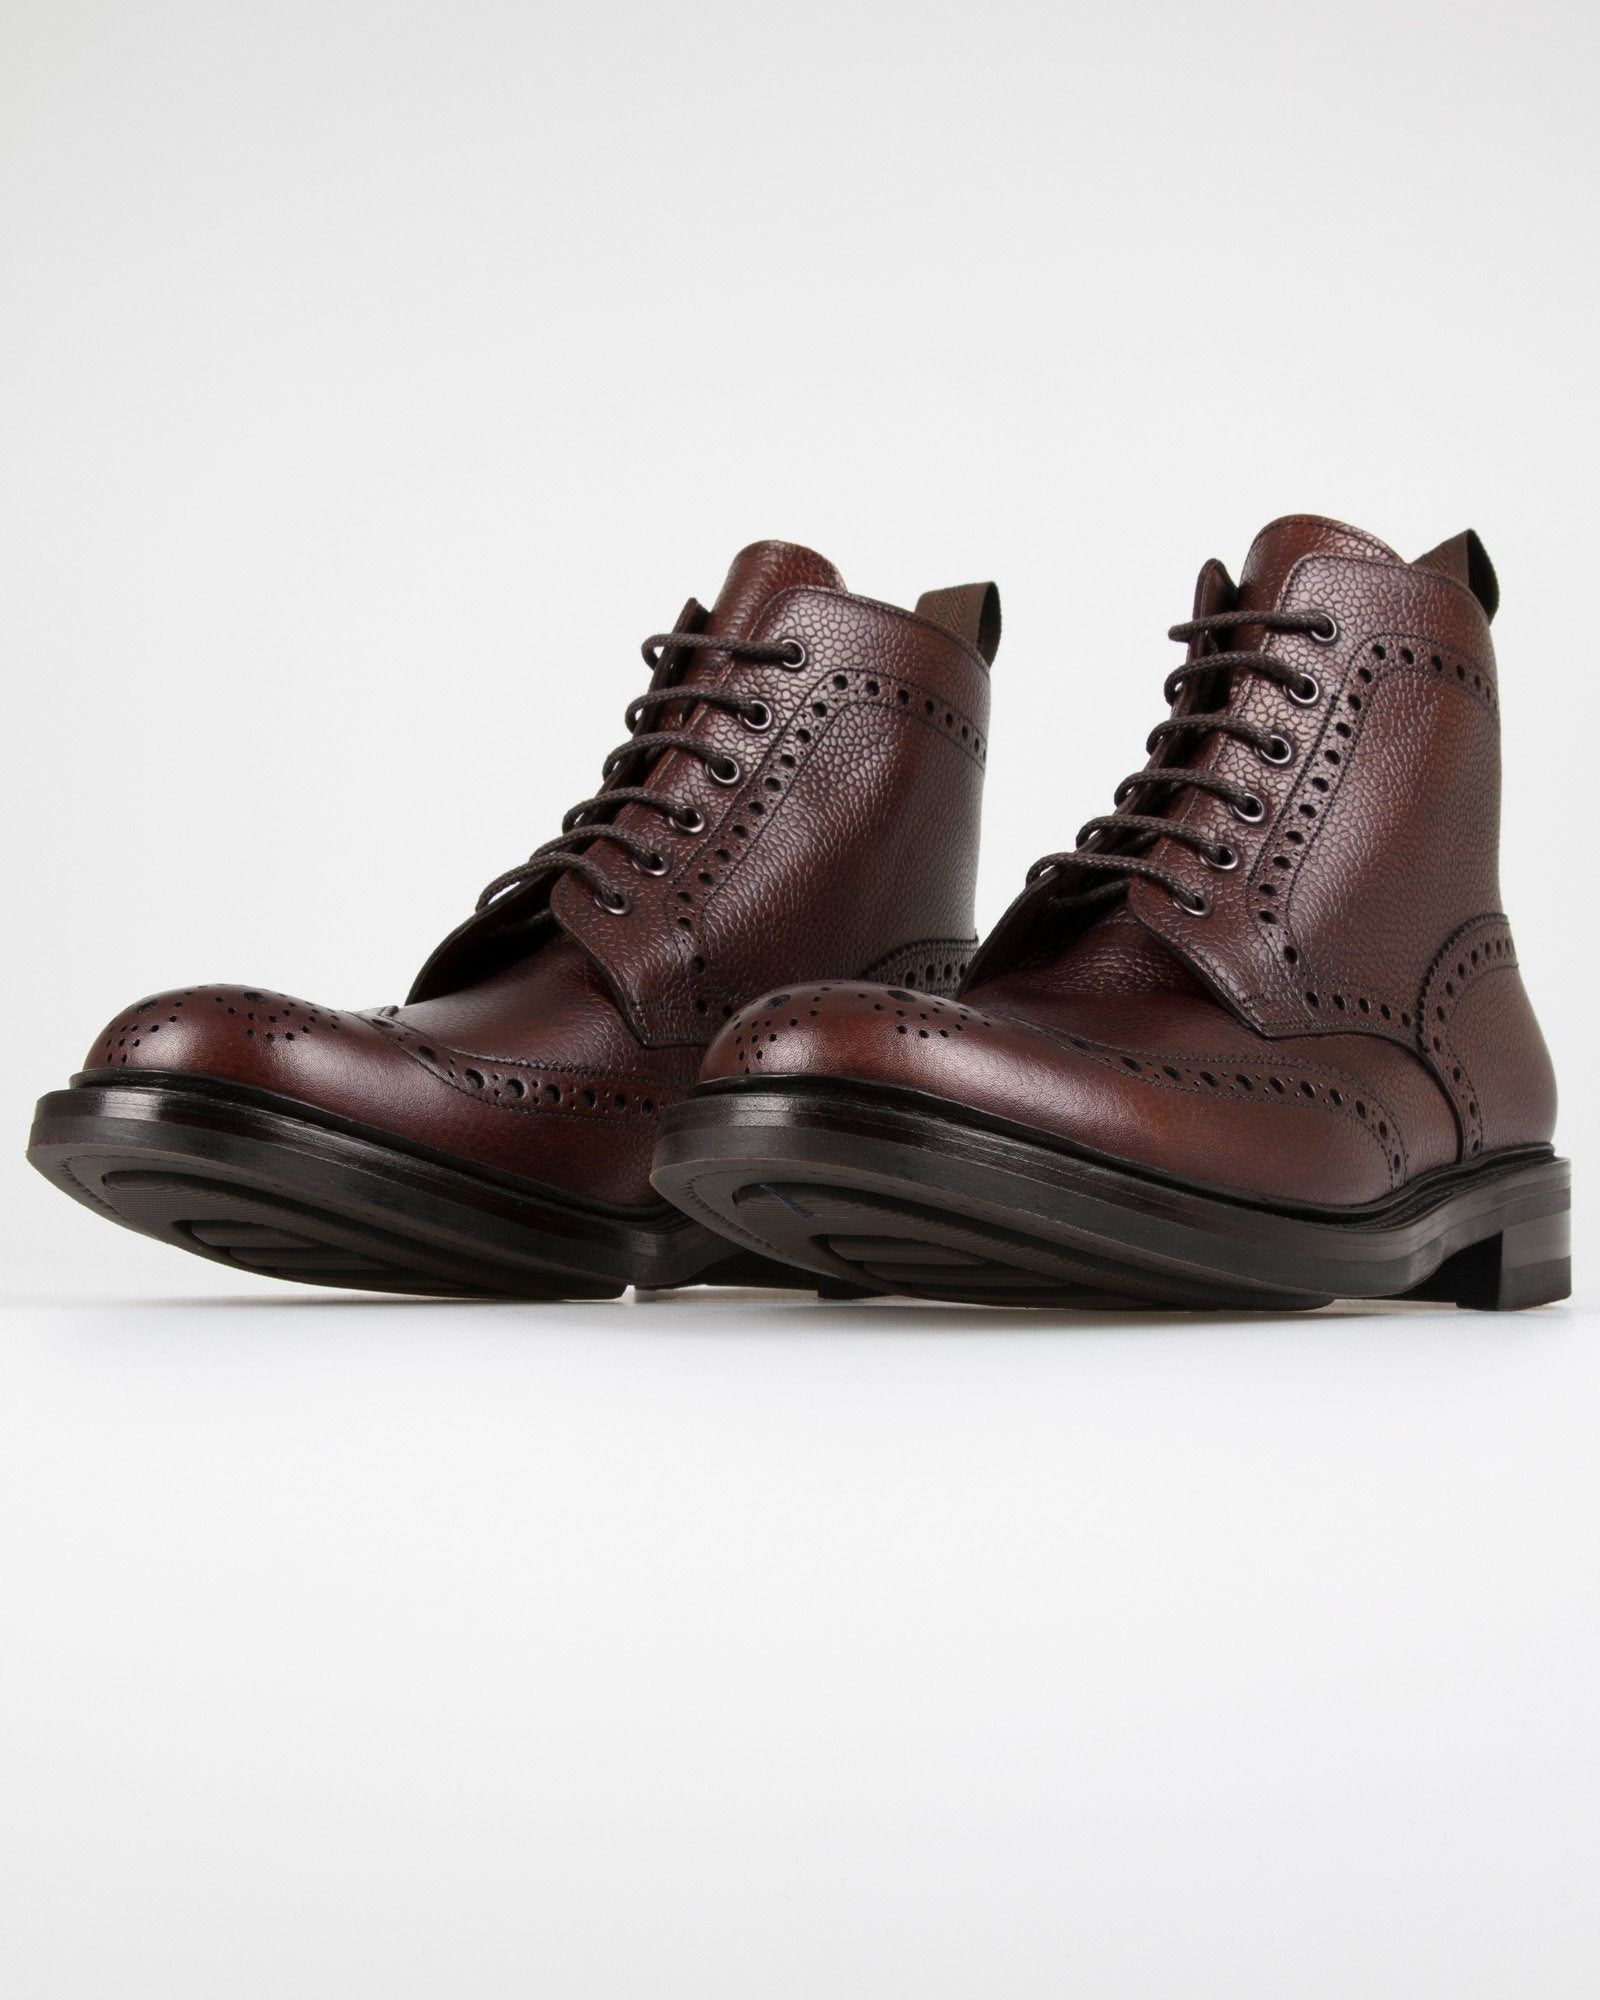 Loake Bedale Brogue Boot - Oxblood 